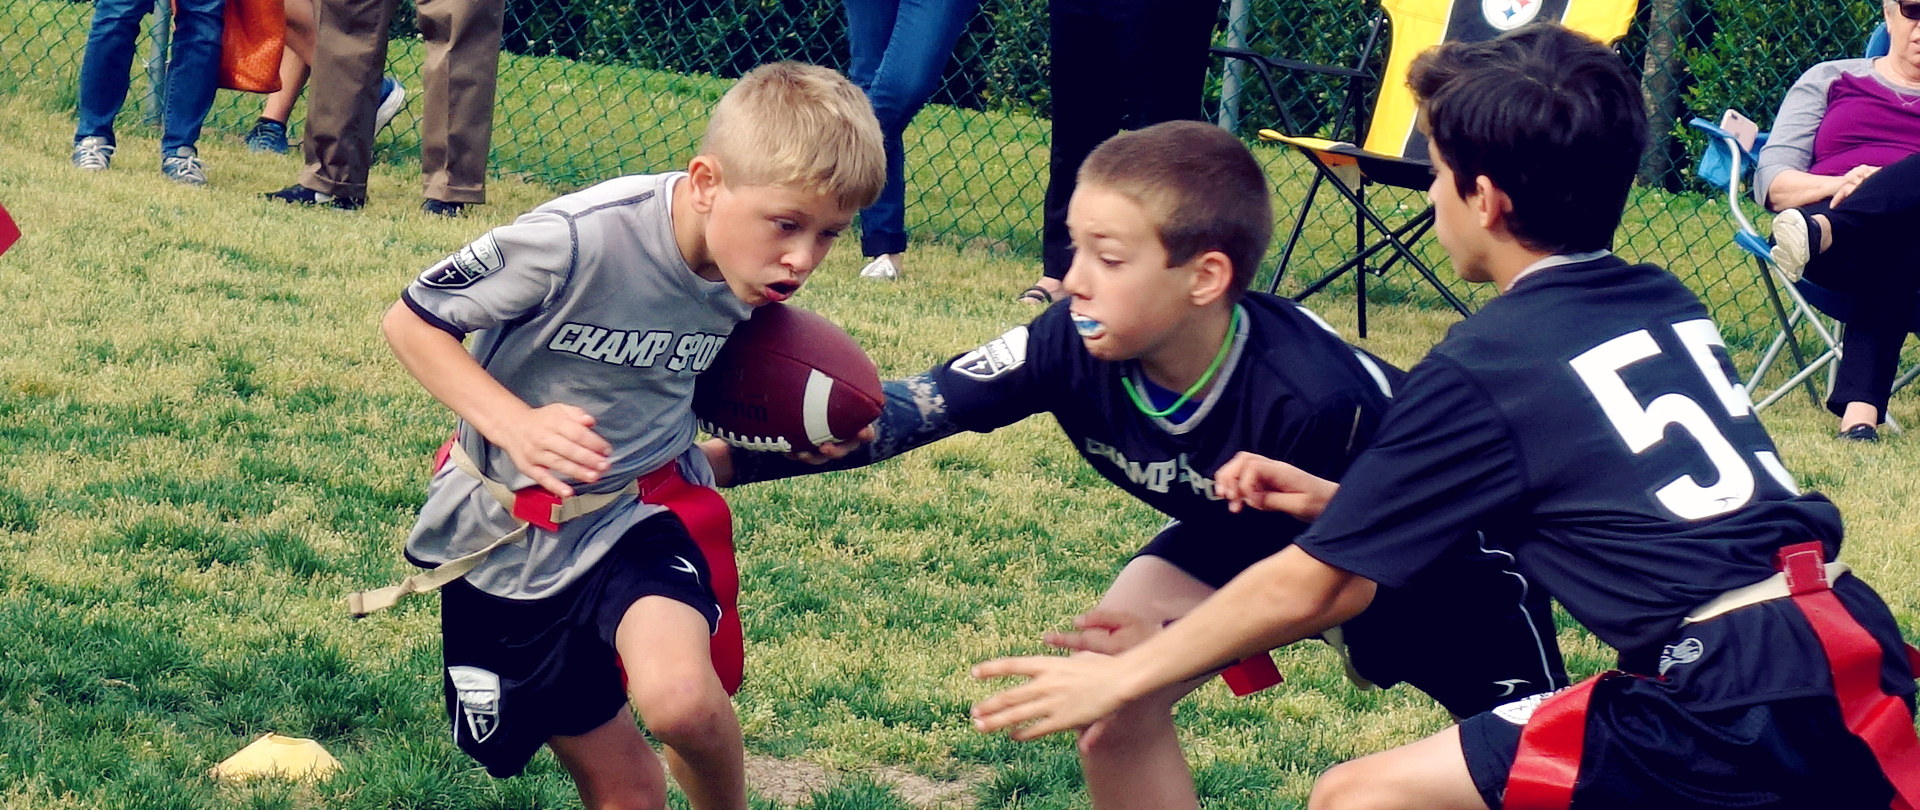 CHAMP Flag Football
Now offering leagues for ages 6-18
 
